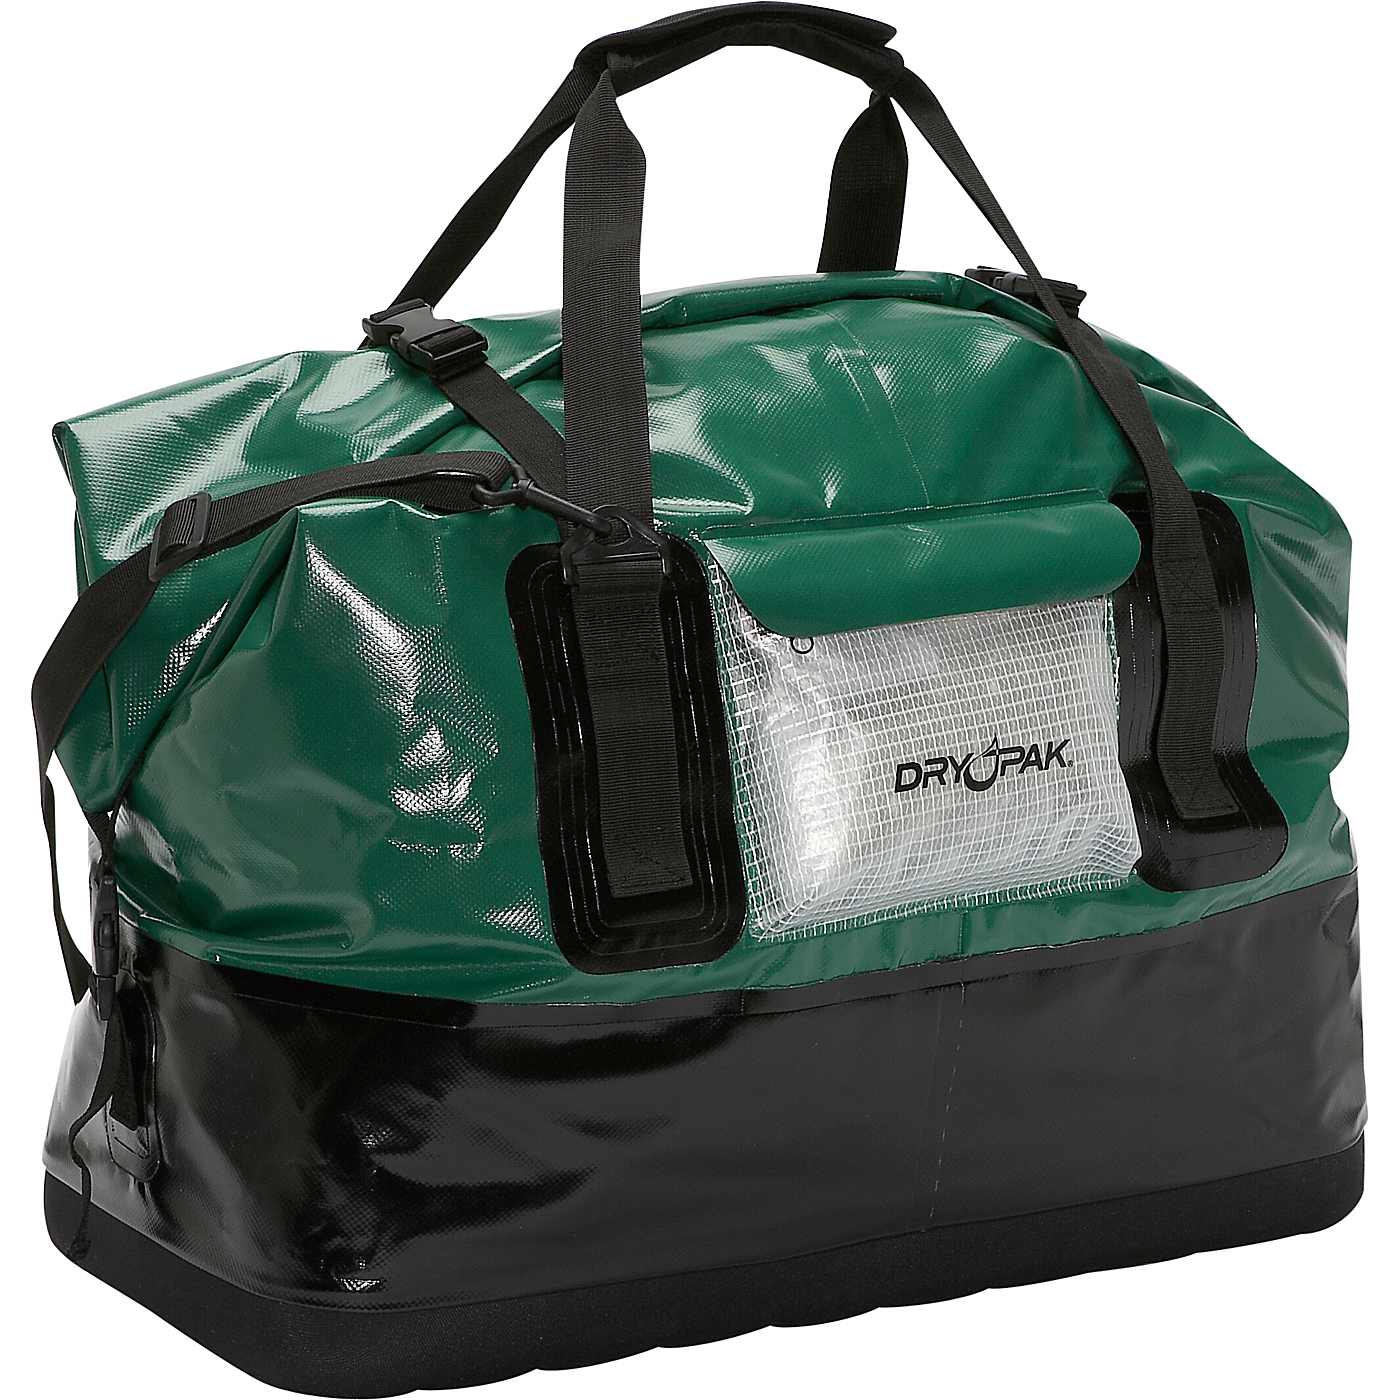 Dry Pak Large Dry Pak Waterproof Duffel View 2 Colors After 20% off $ 